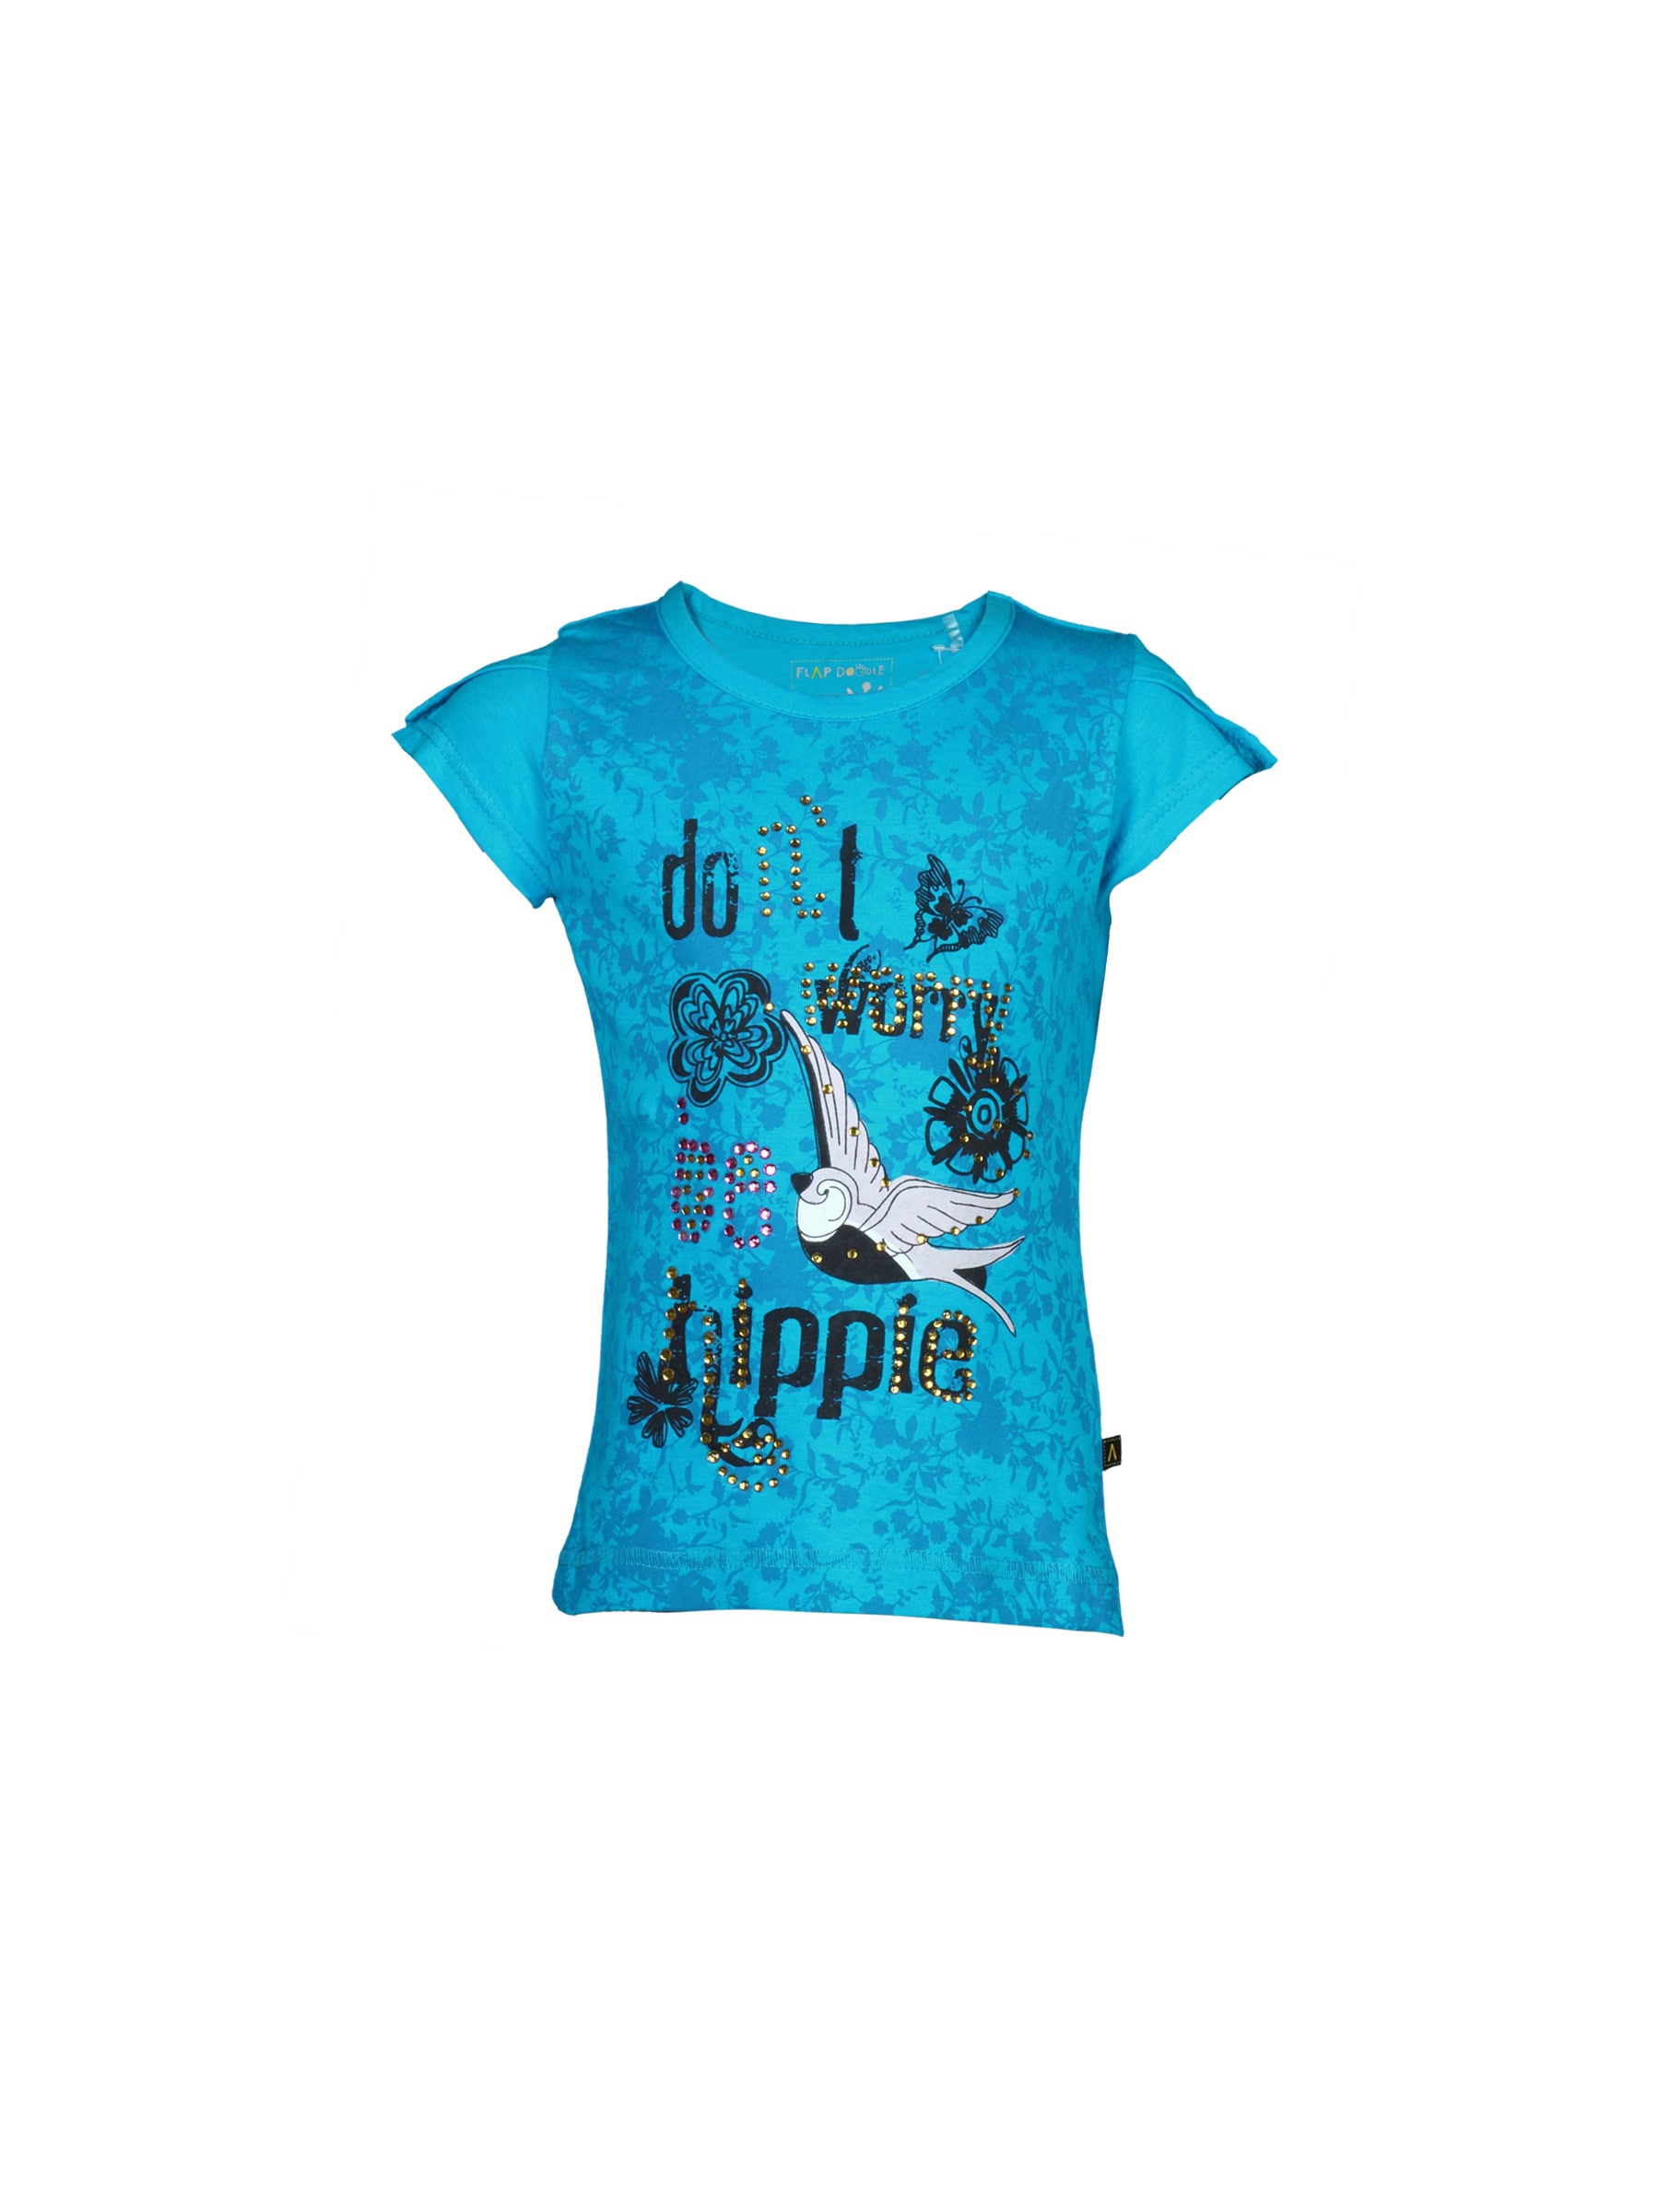 Doodle Girl's Dont Worry Hippie Teal Blue Kidswear